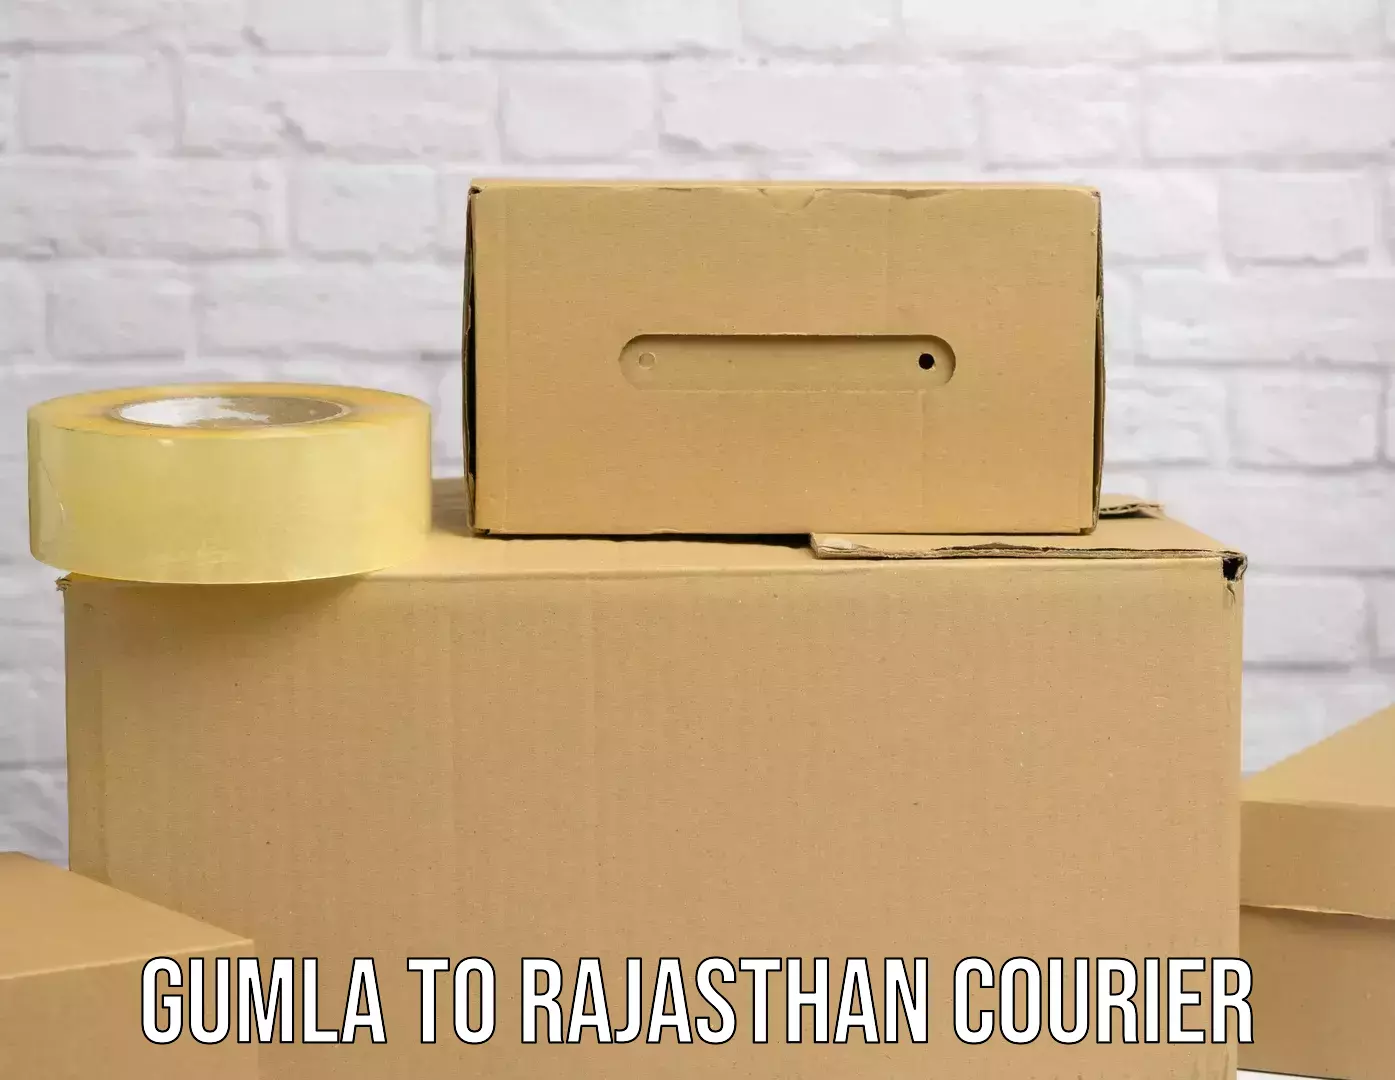 State-of-the-art courier technology Gumla to Mathania